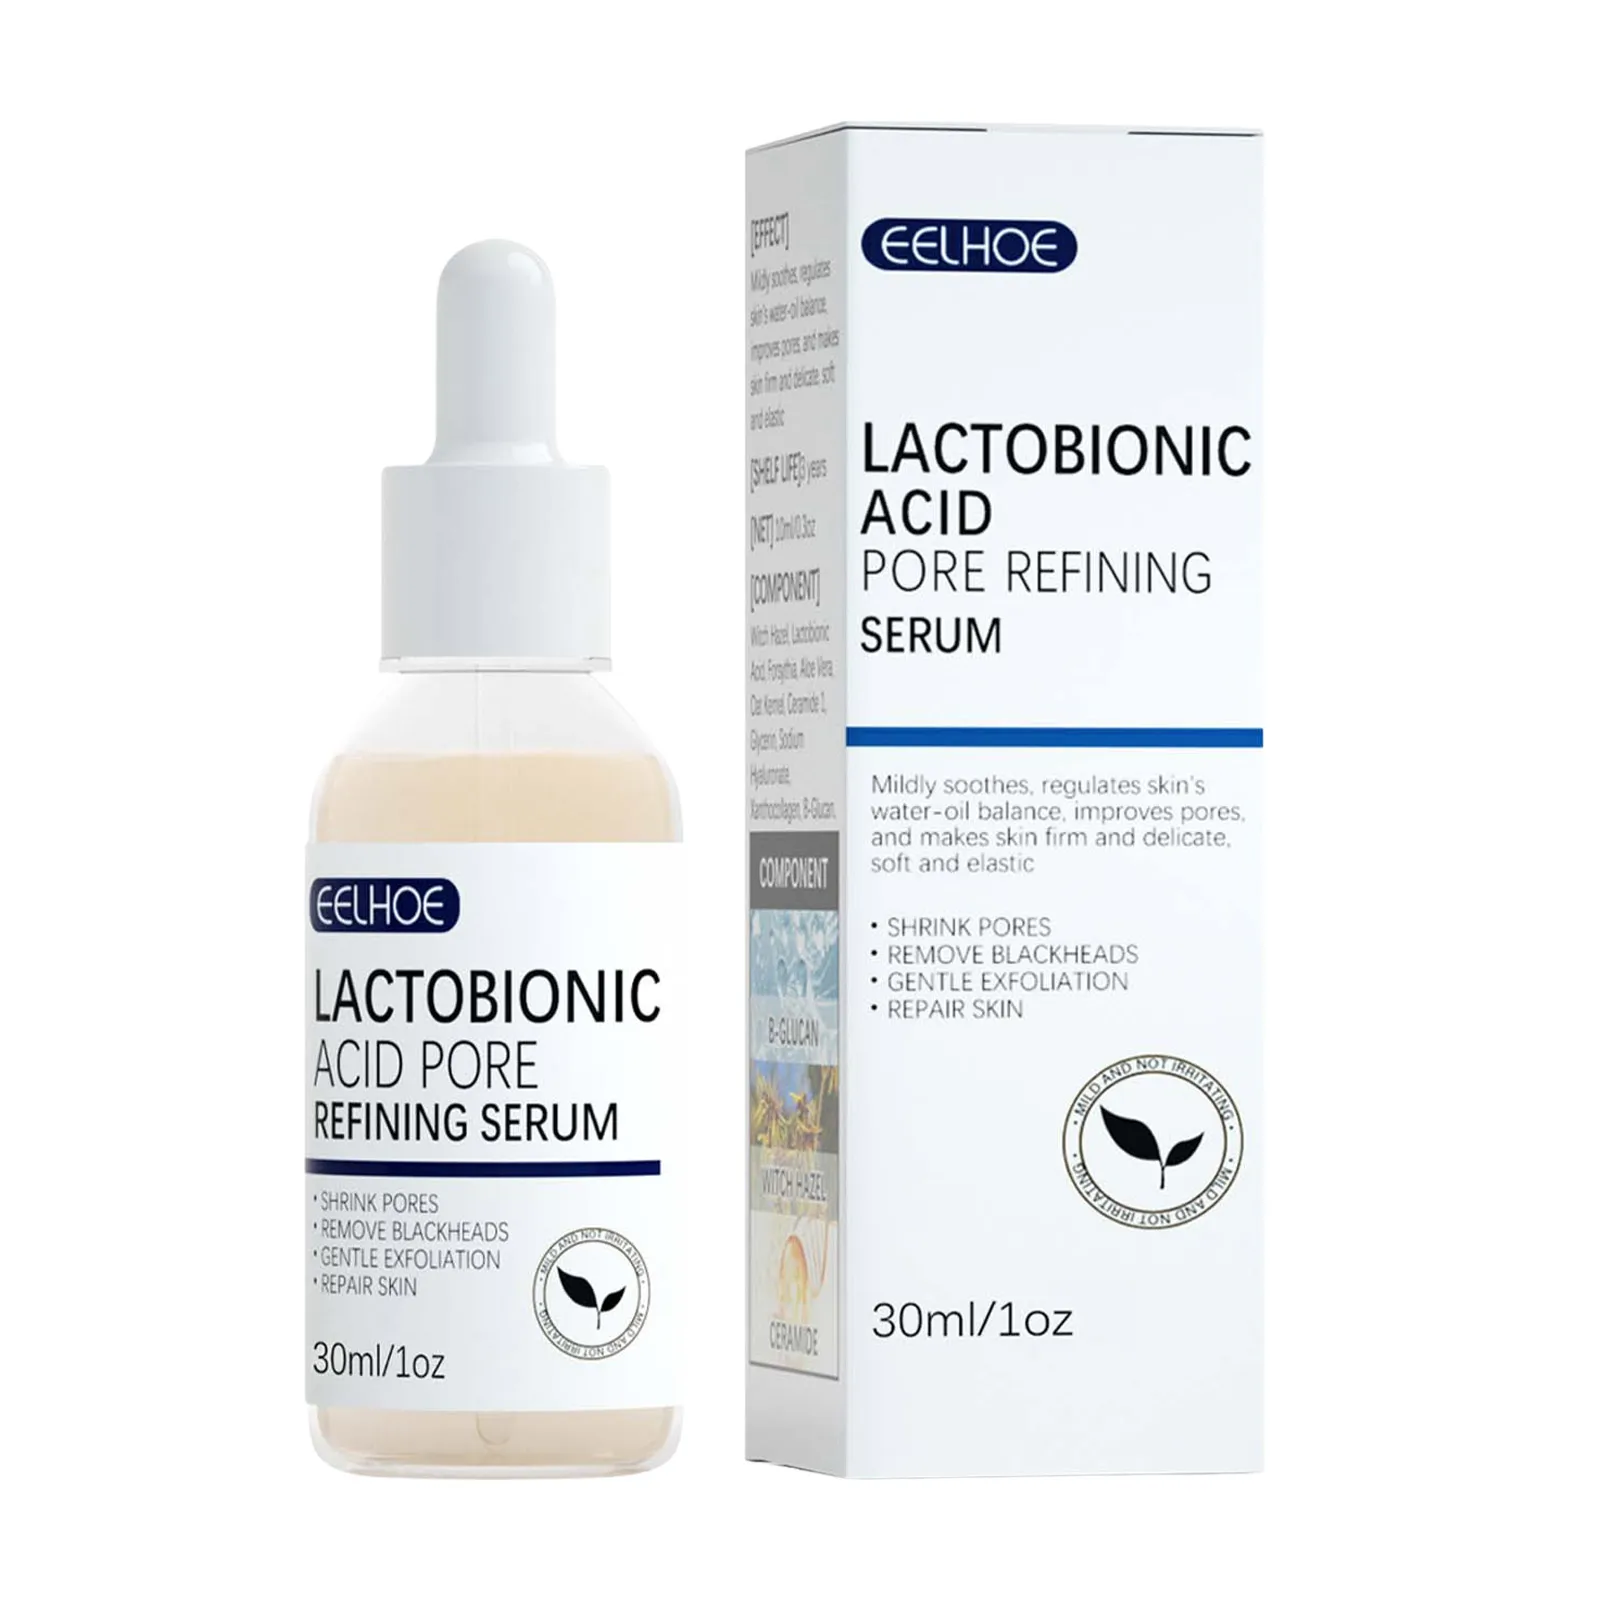 

Instant Perfection Serums Facial Lactobionic Acid Skin Care Face Serums Reduce Wrinkles Fine Anti-Wrinkles Age-Defying Power